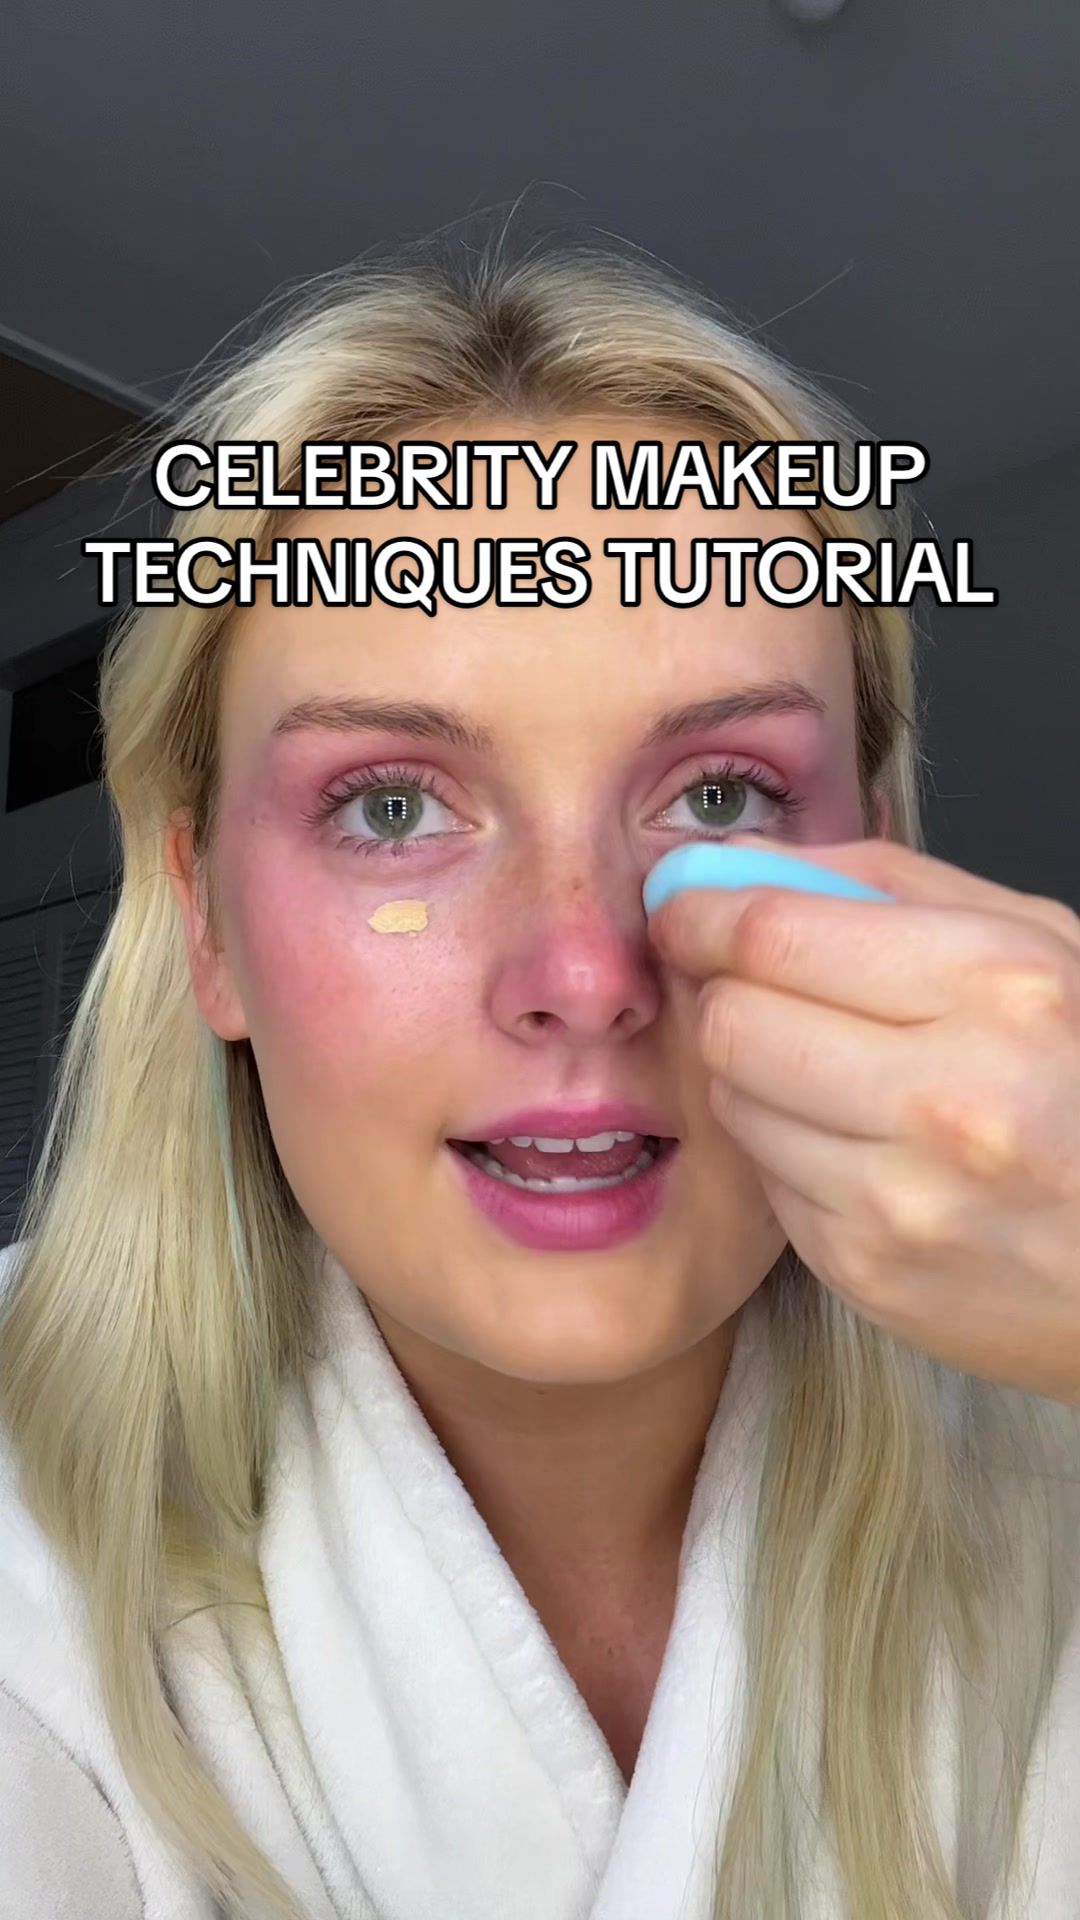 @anna_annora Watch this tutorial if you want to seriously improve your makeup ga...